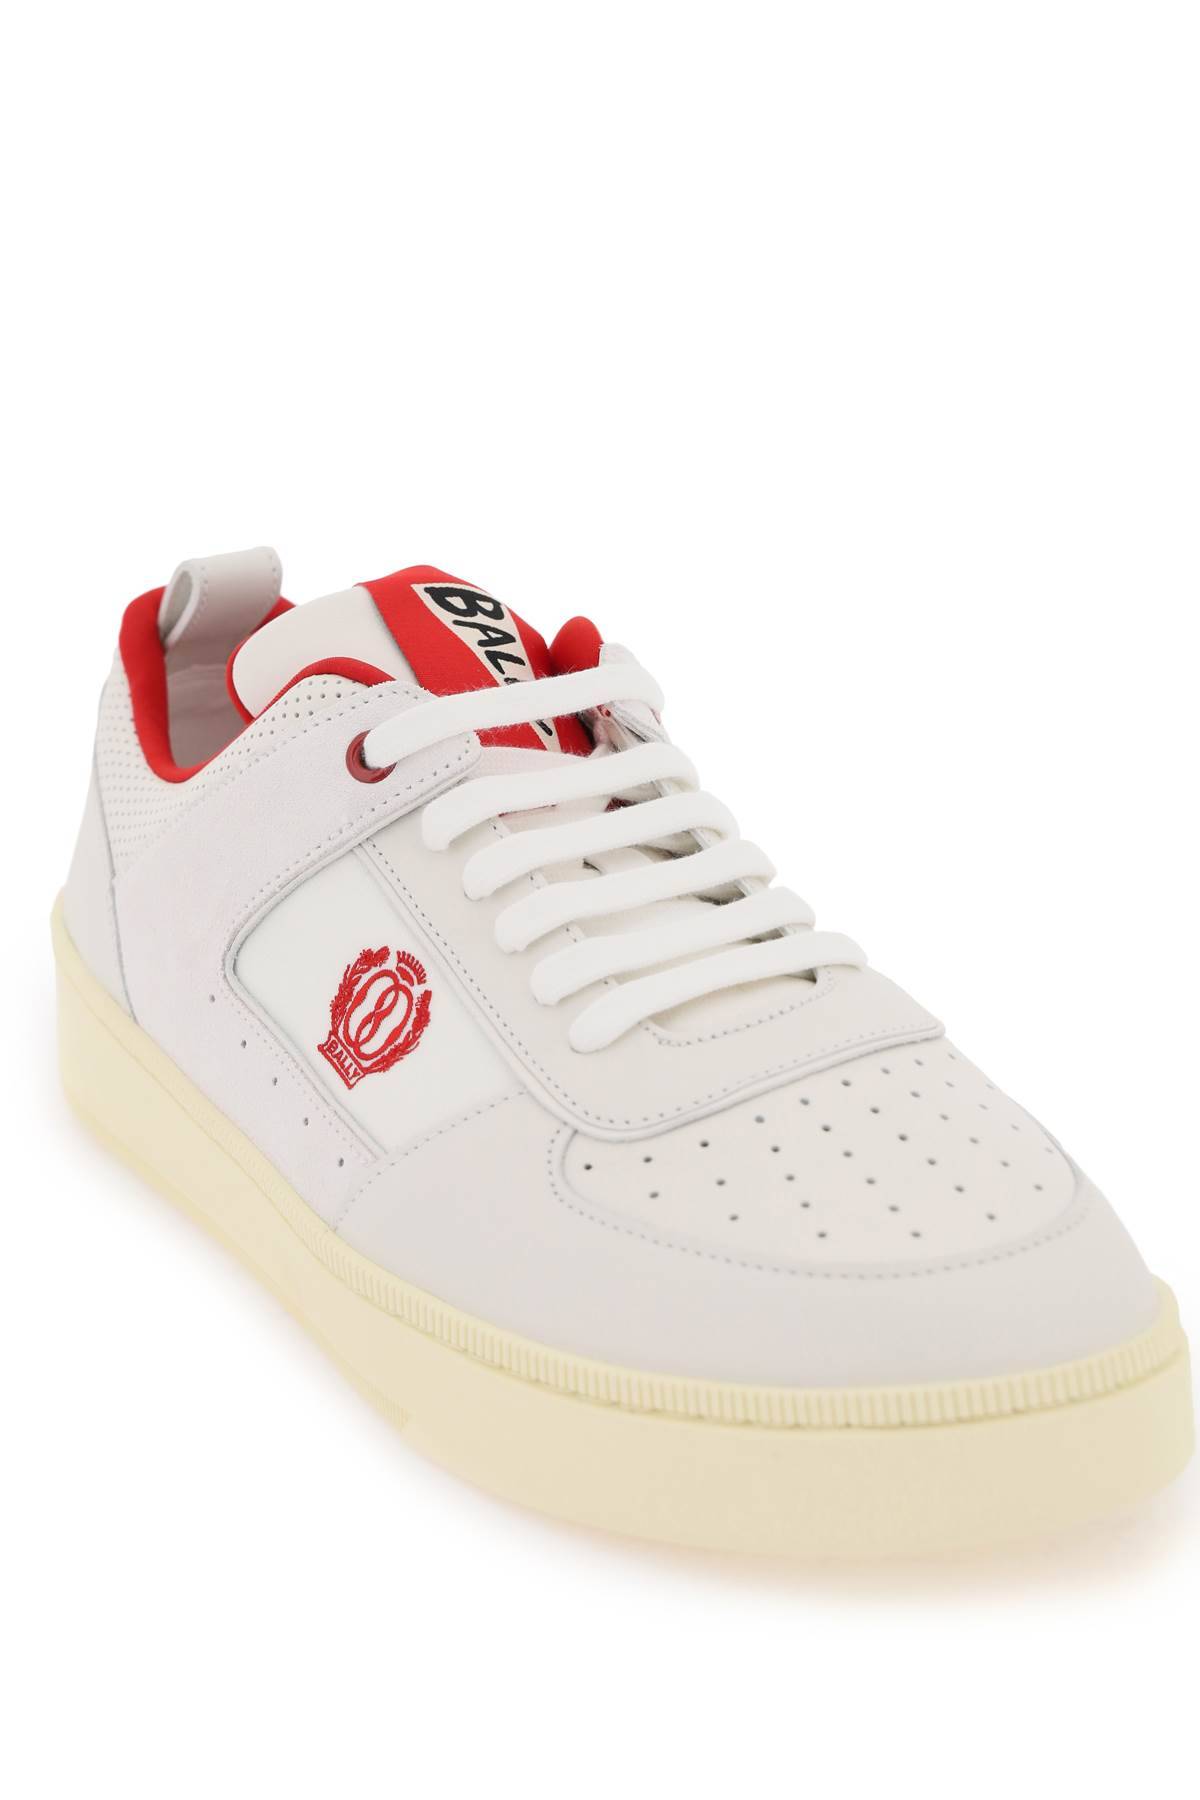 Shop Bally Leather Riweira Sneakers In White,red